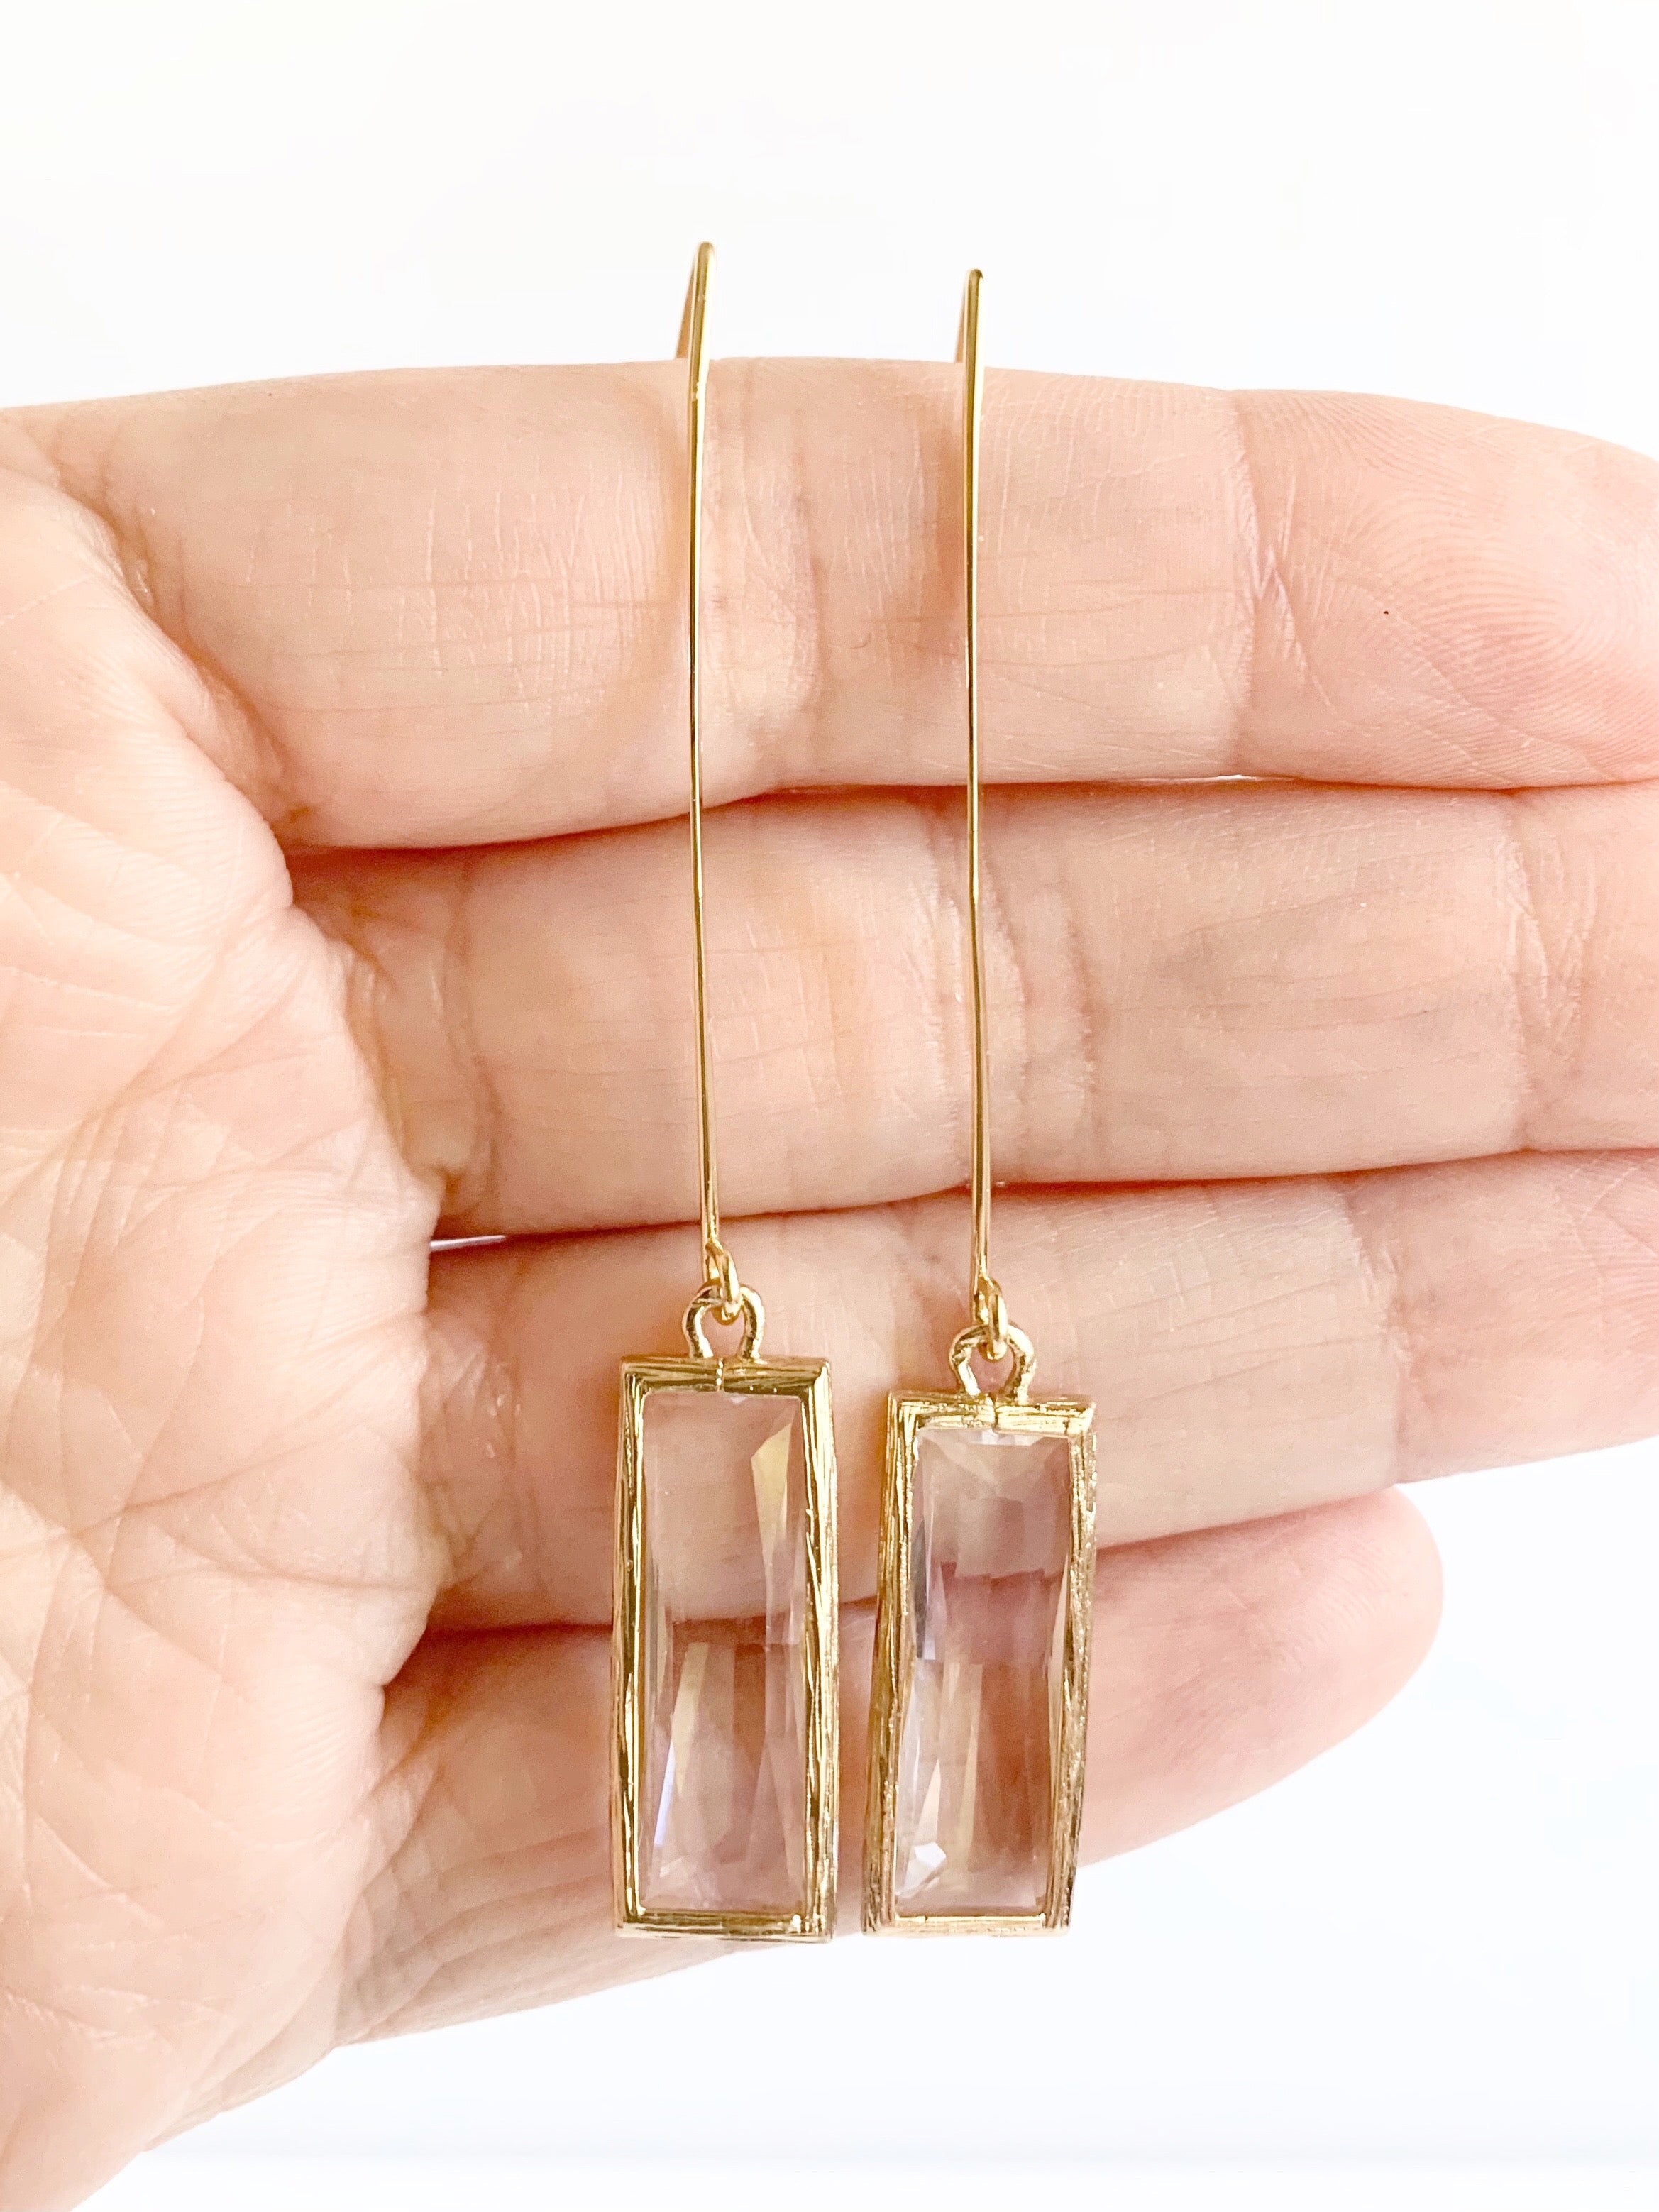 long gold pendant earrings displayed on hand